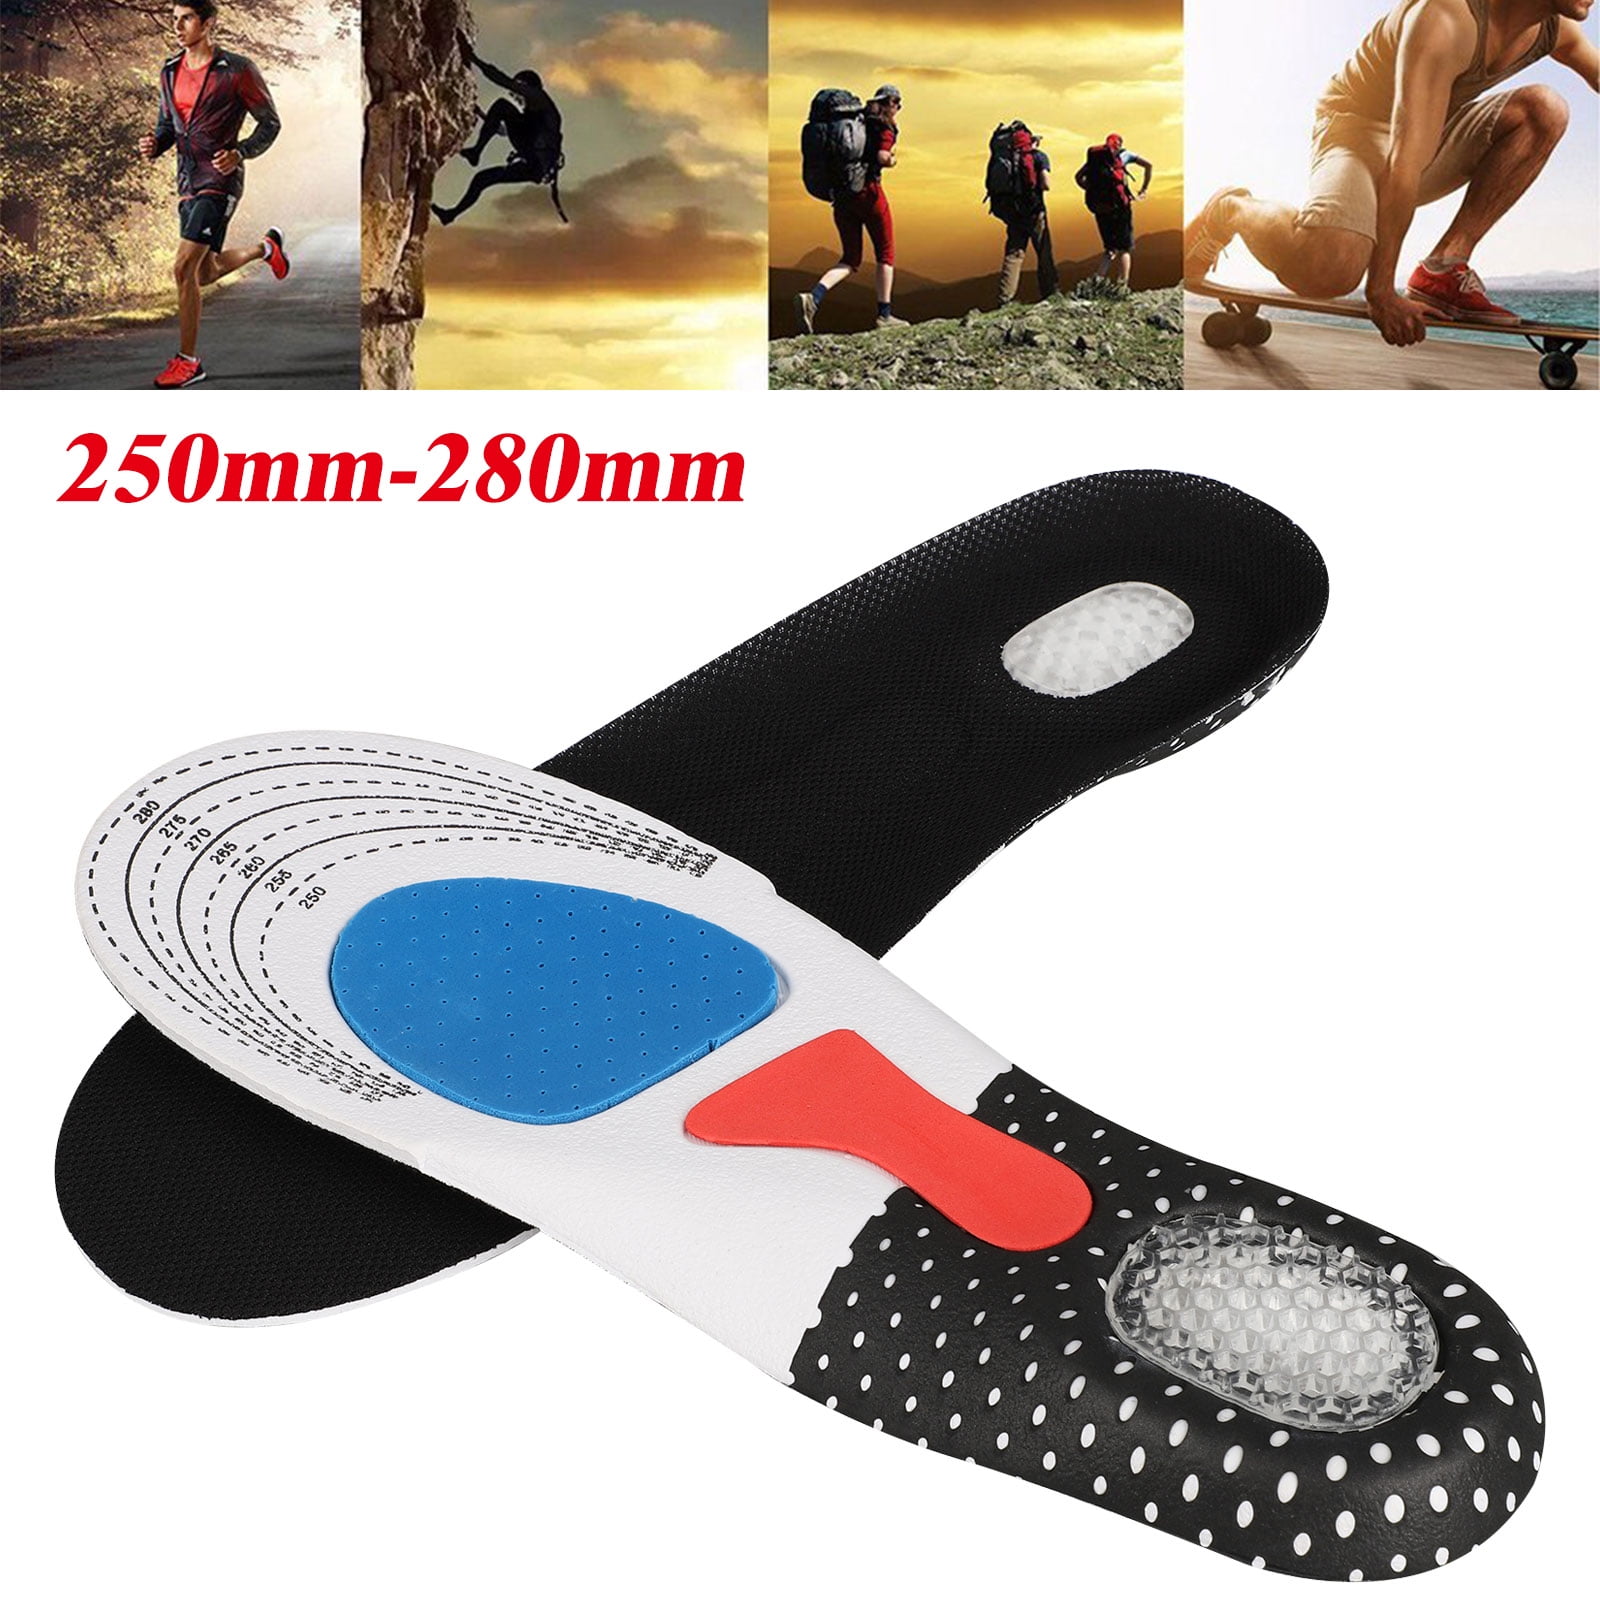 Orthotics Insoles Gel Massaging Shoes Heel Insoles Foot Cushioning Massage Shock Absorber Sports Orthopedic Insoles Plantar Fasciitis Running Flat Feet Achilles Arch Issue Heel Spurs 